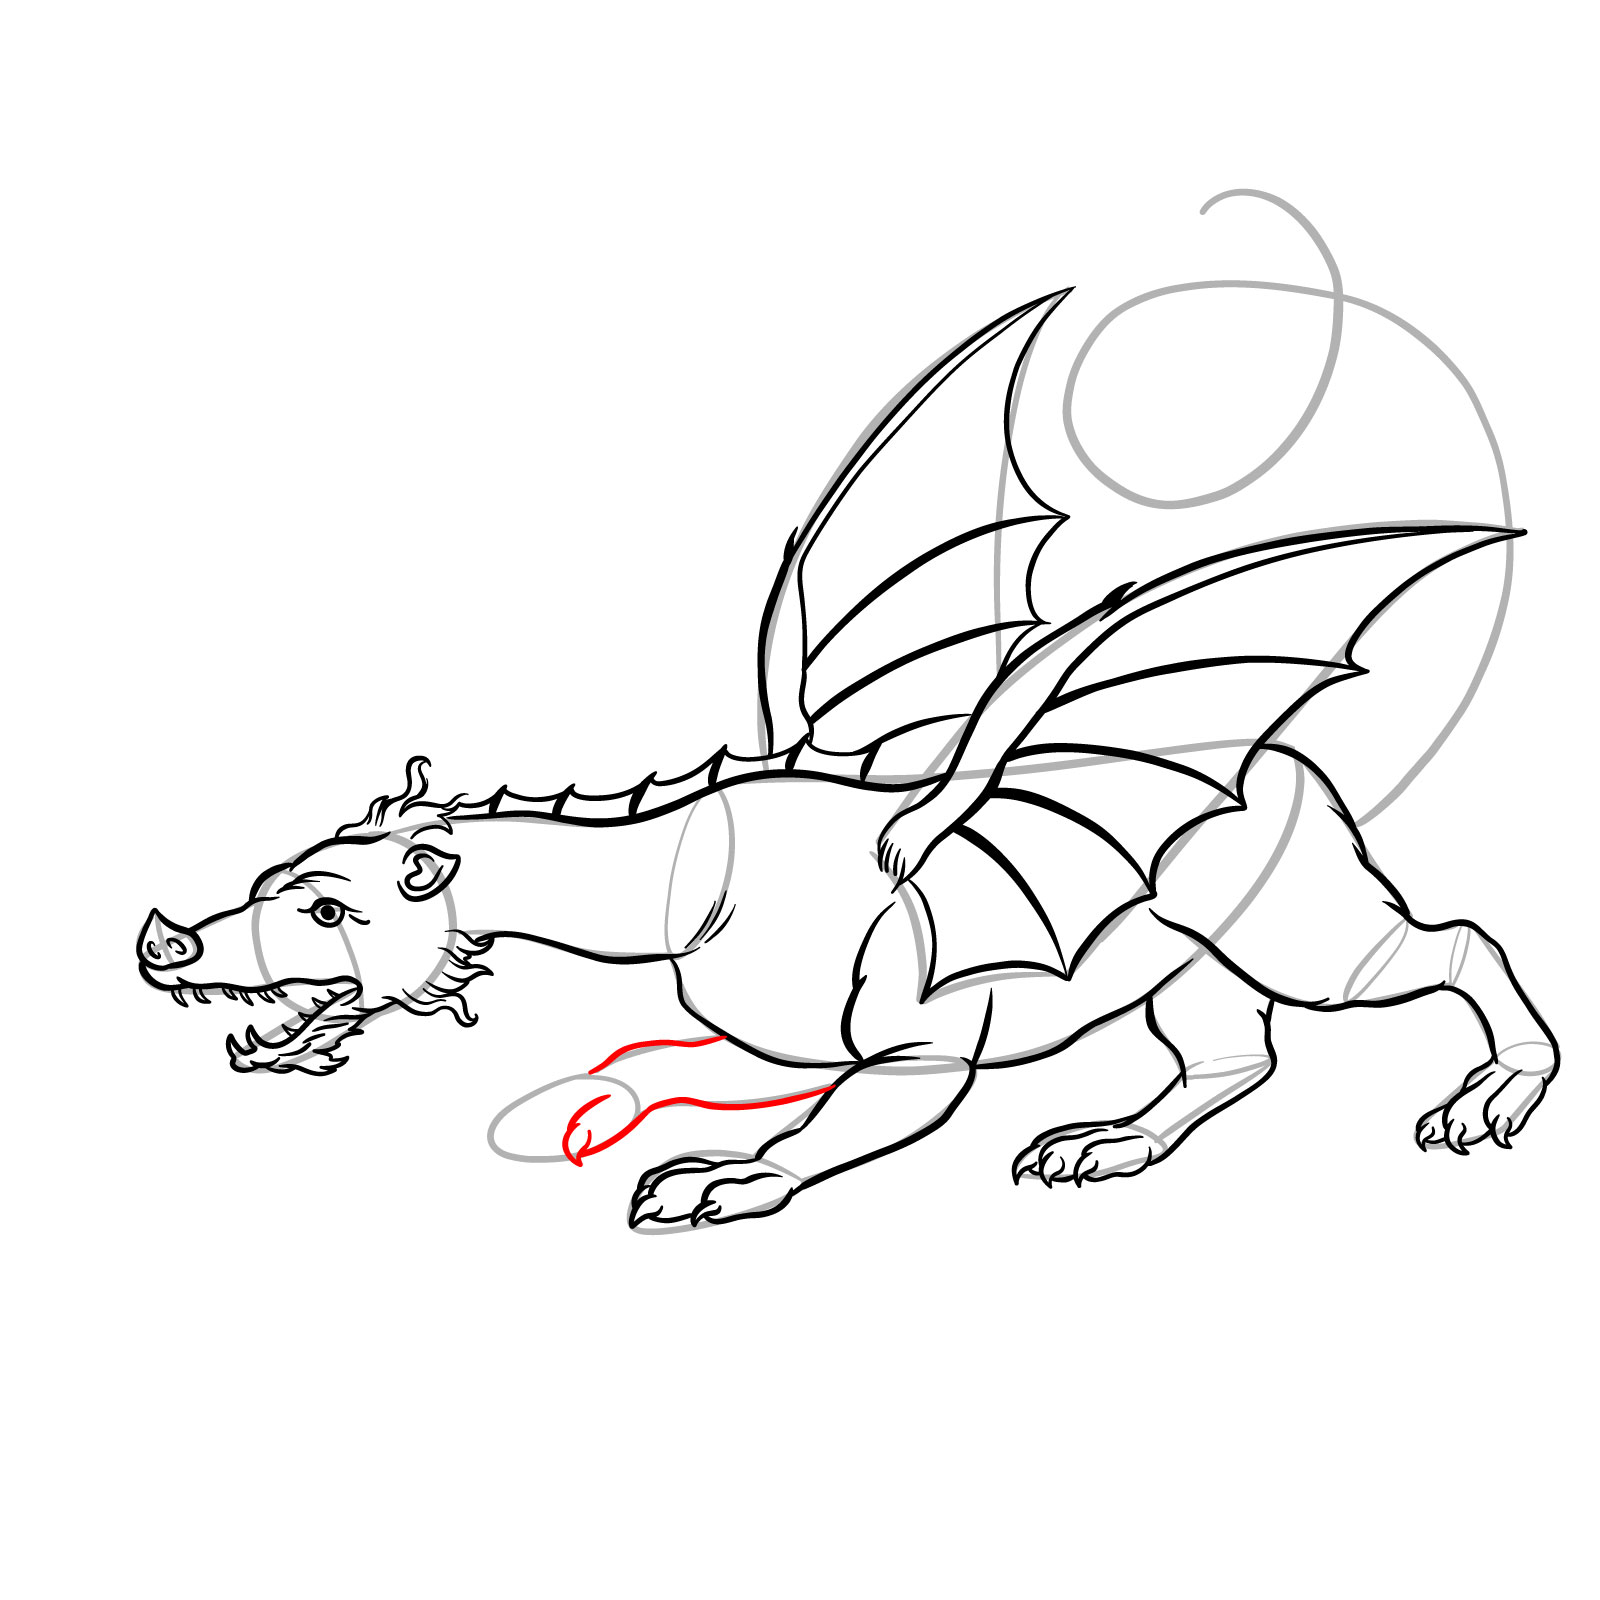 How to draw a classic European dragon - step 38